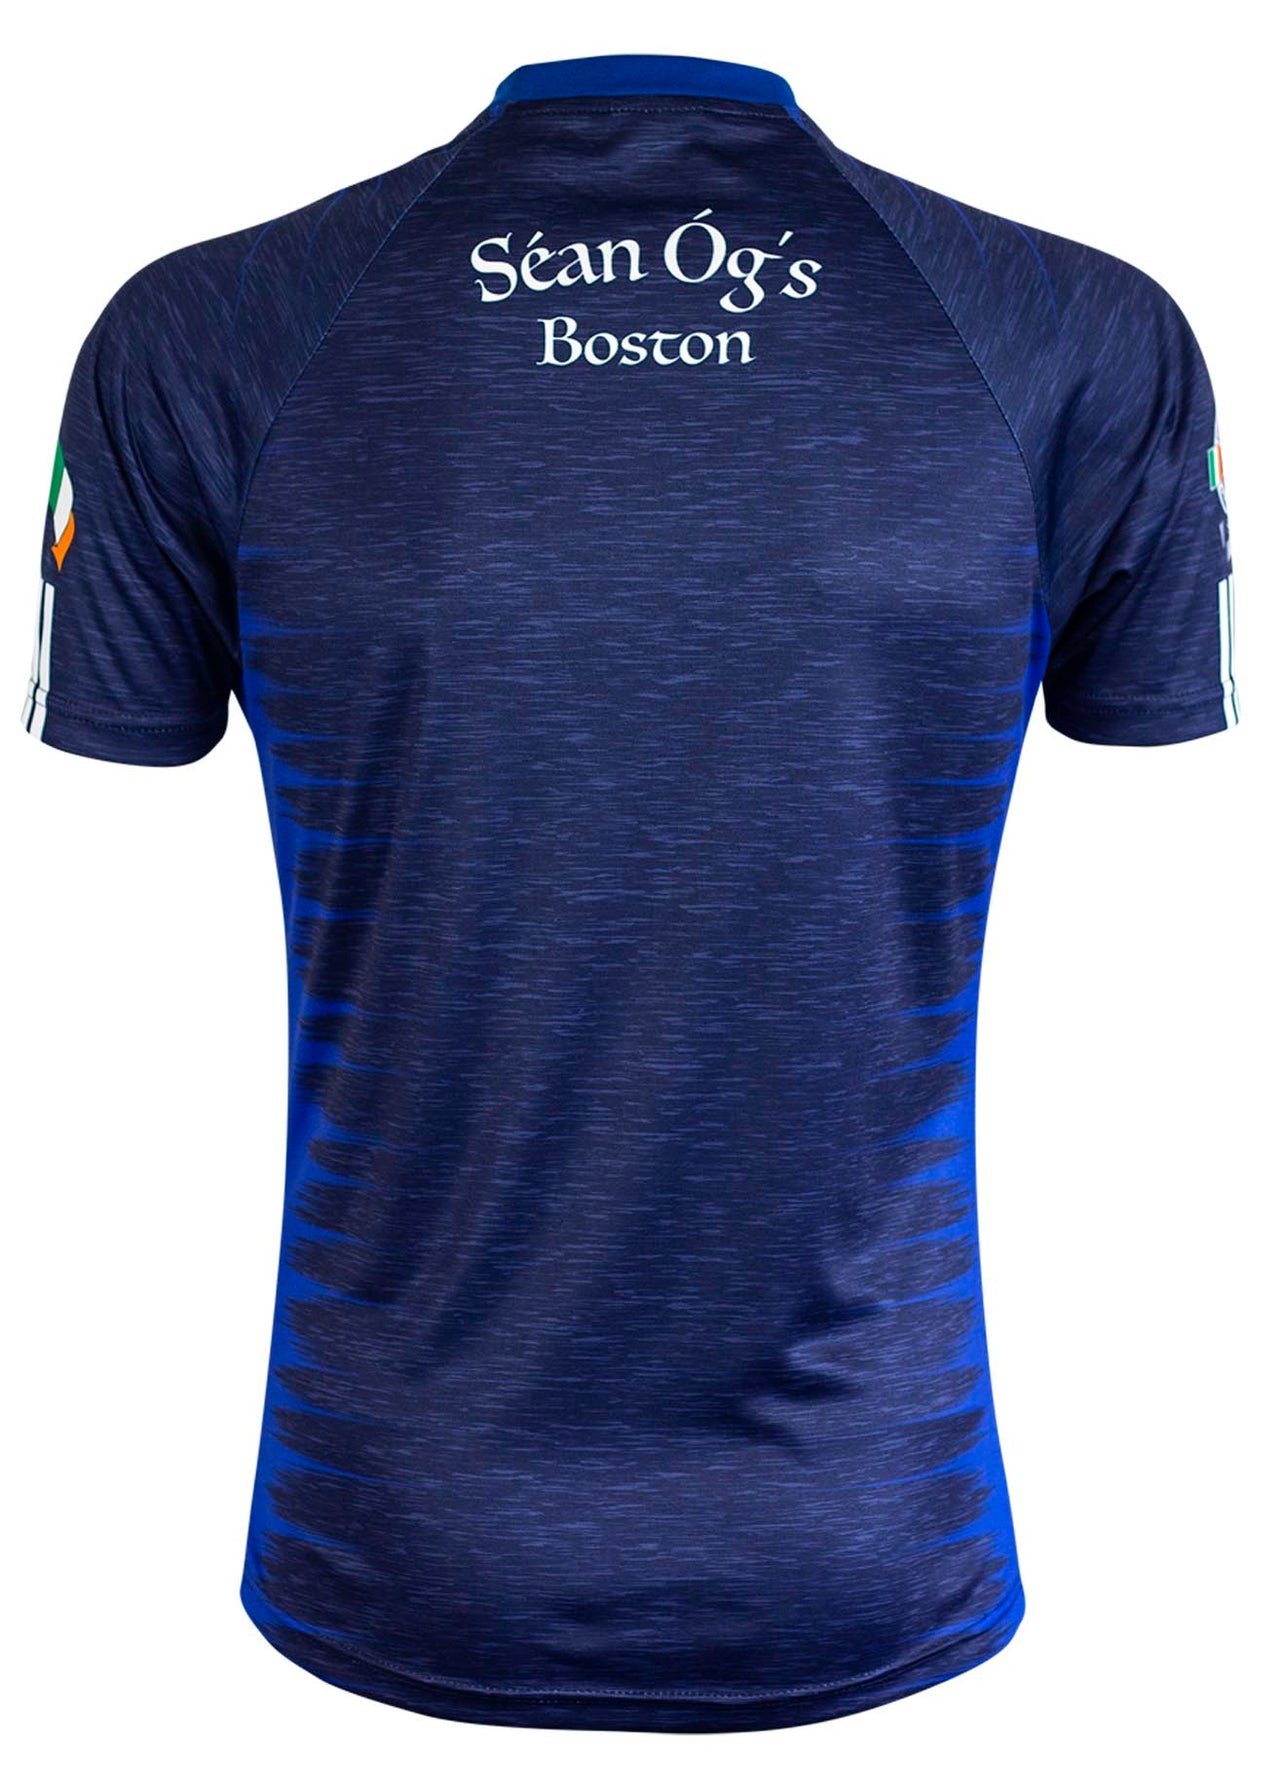 Sean OGS Boston Training Jersey Player Fit Adult